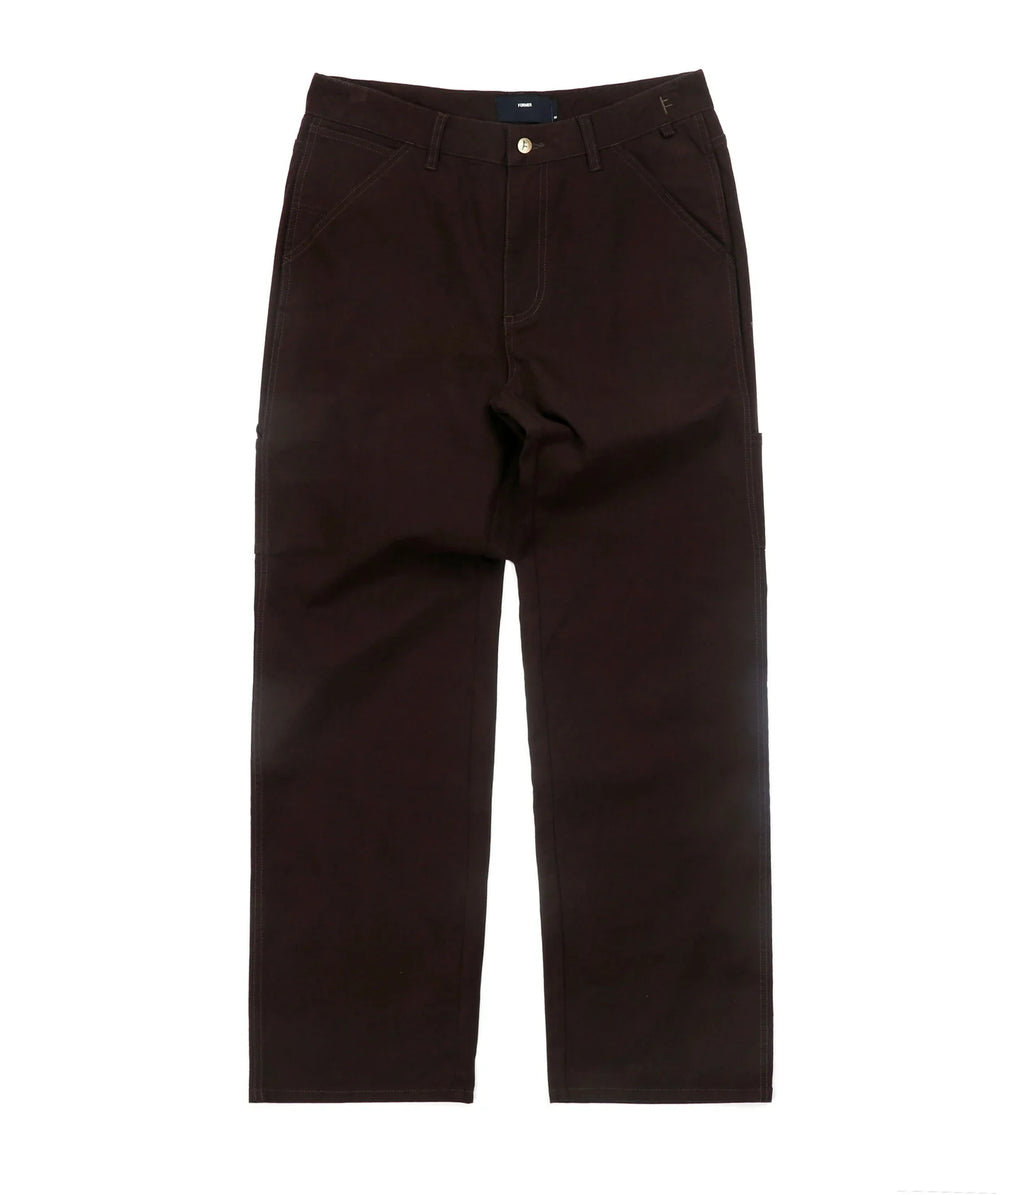 Former Pant Distend VT Brown front view